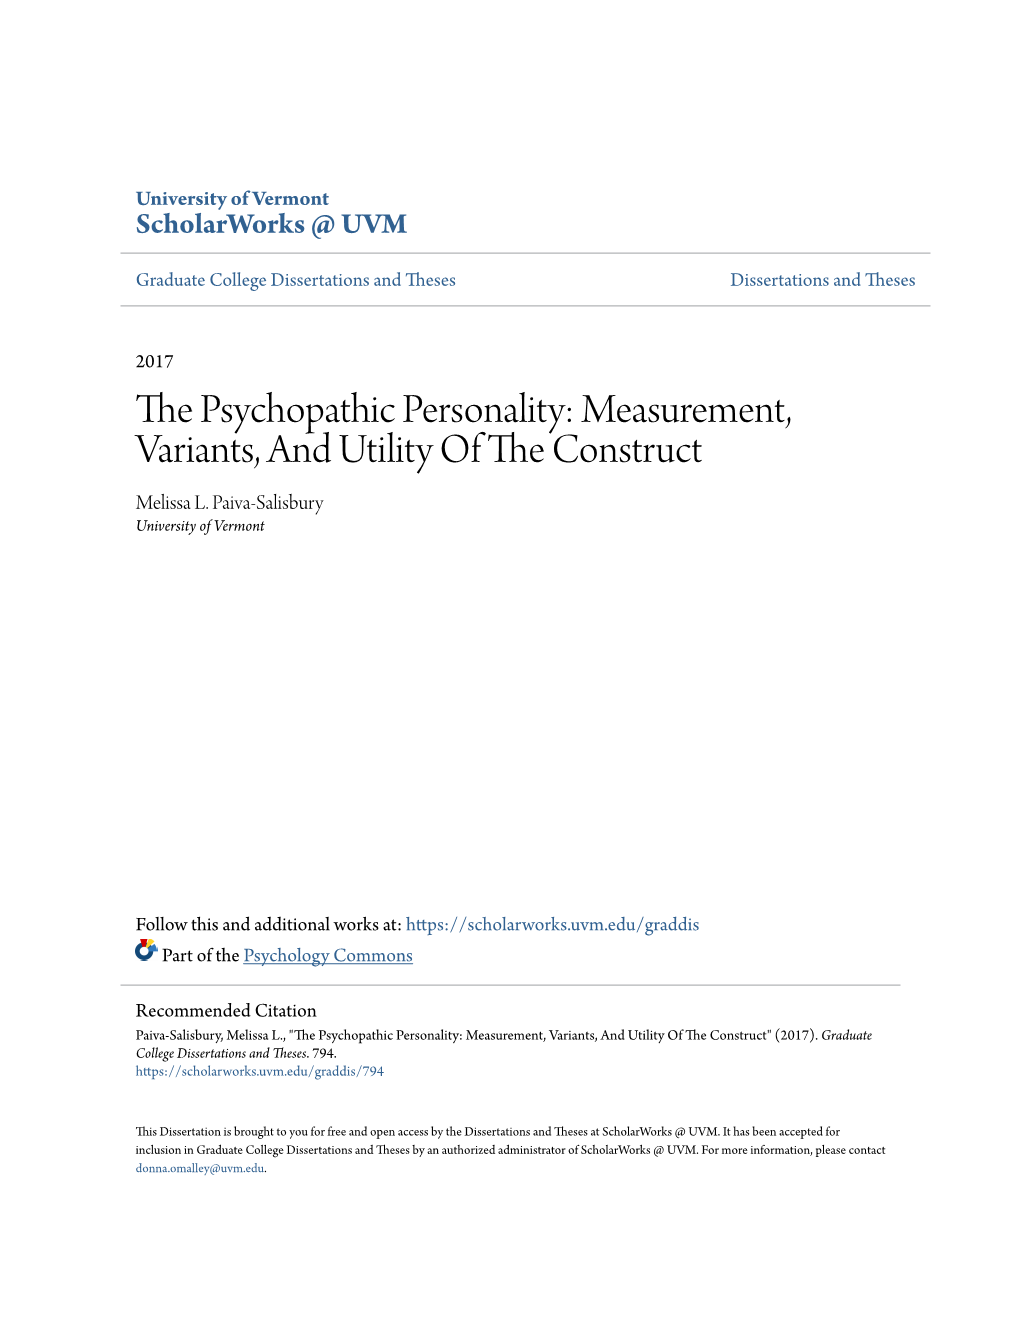 The Psychopathic Personality: Measurement, Variants, and Utility of the Construct